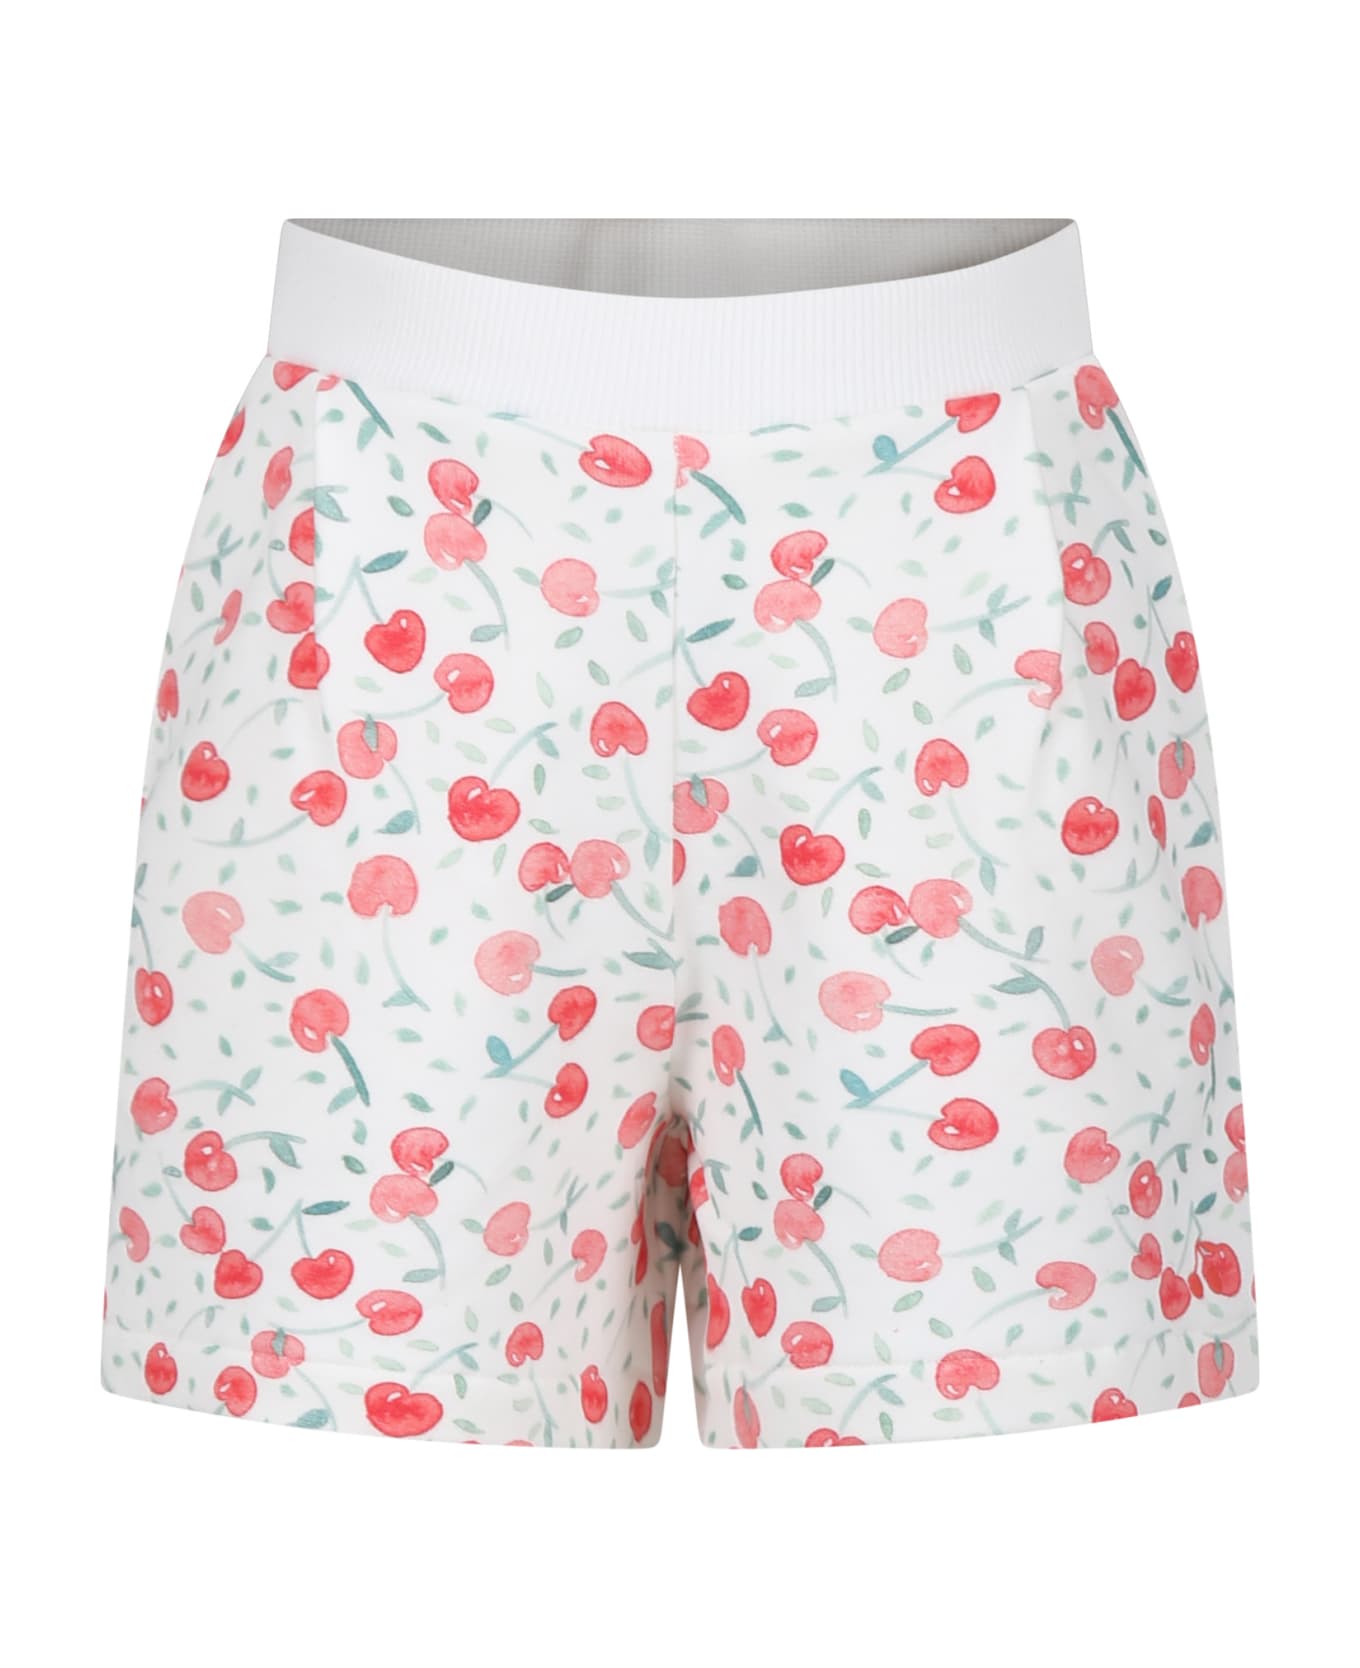 Bonpoint Ivory Sports Shorts For Girl With Cherries - Ivory ボトムス